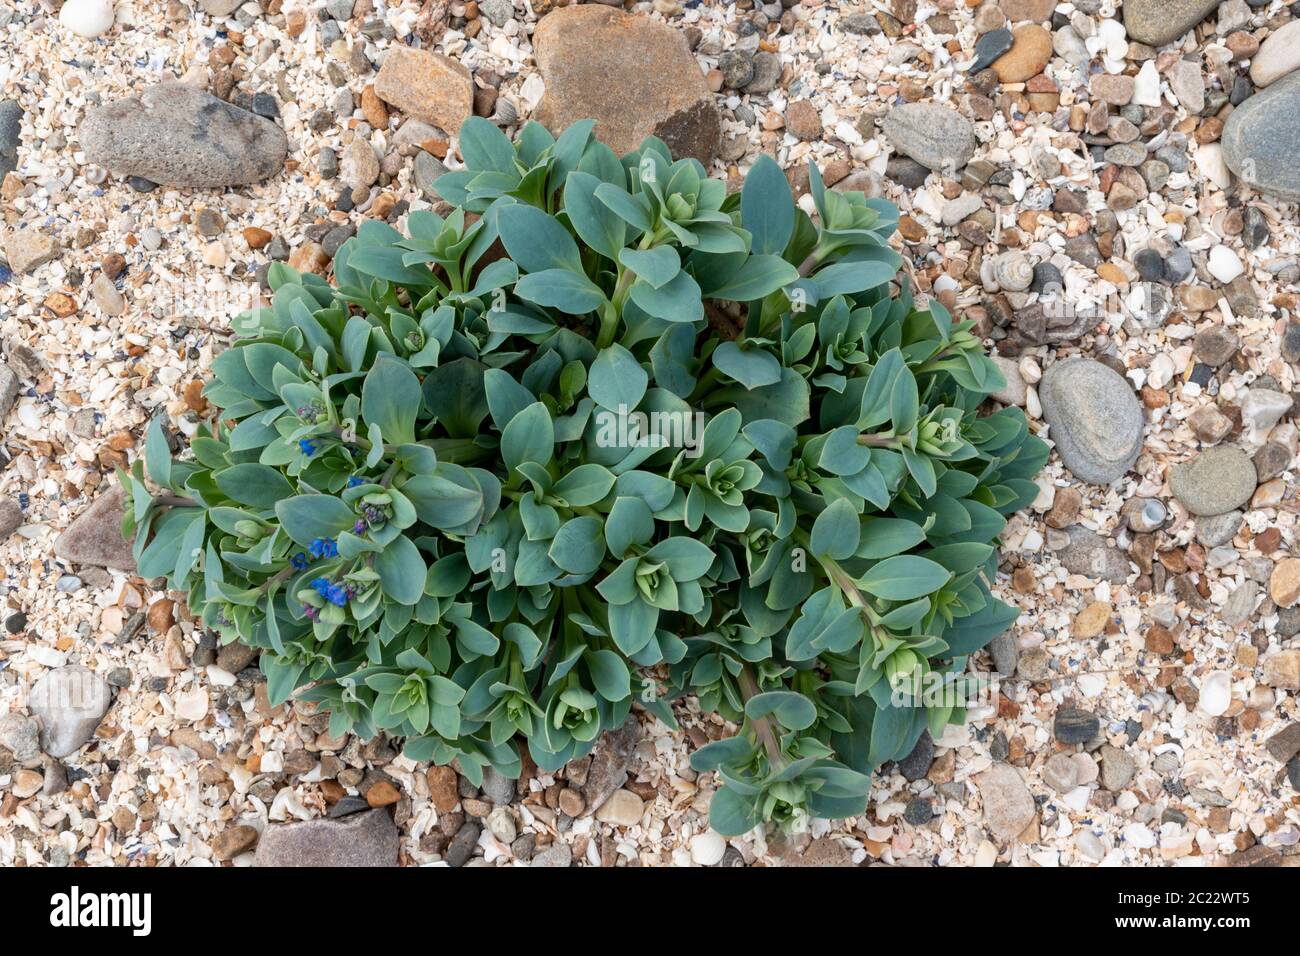 OYSTERPLANT Mertensia maritima  A  BLUE GREEN PLANT WITH BRIGHT BLUE FLOWERS ON A SEASHELL AND ROCK COVERED BEACH THE MORAY COAST SCOTLAND Stock Photo